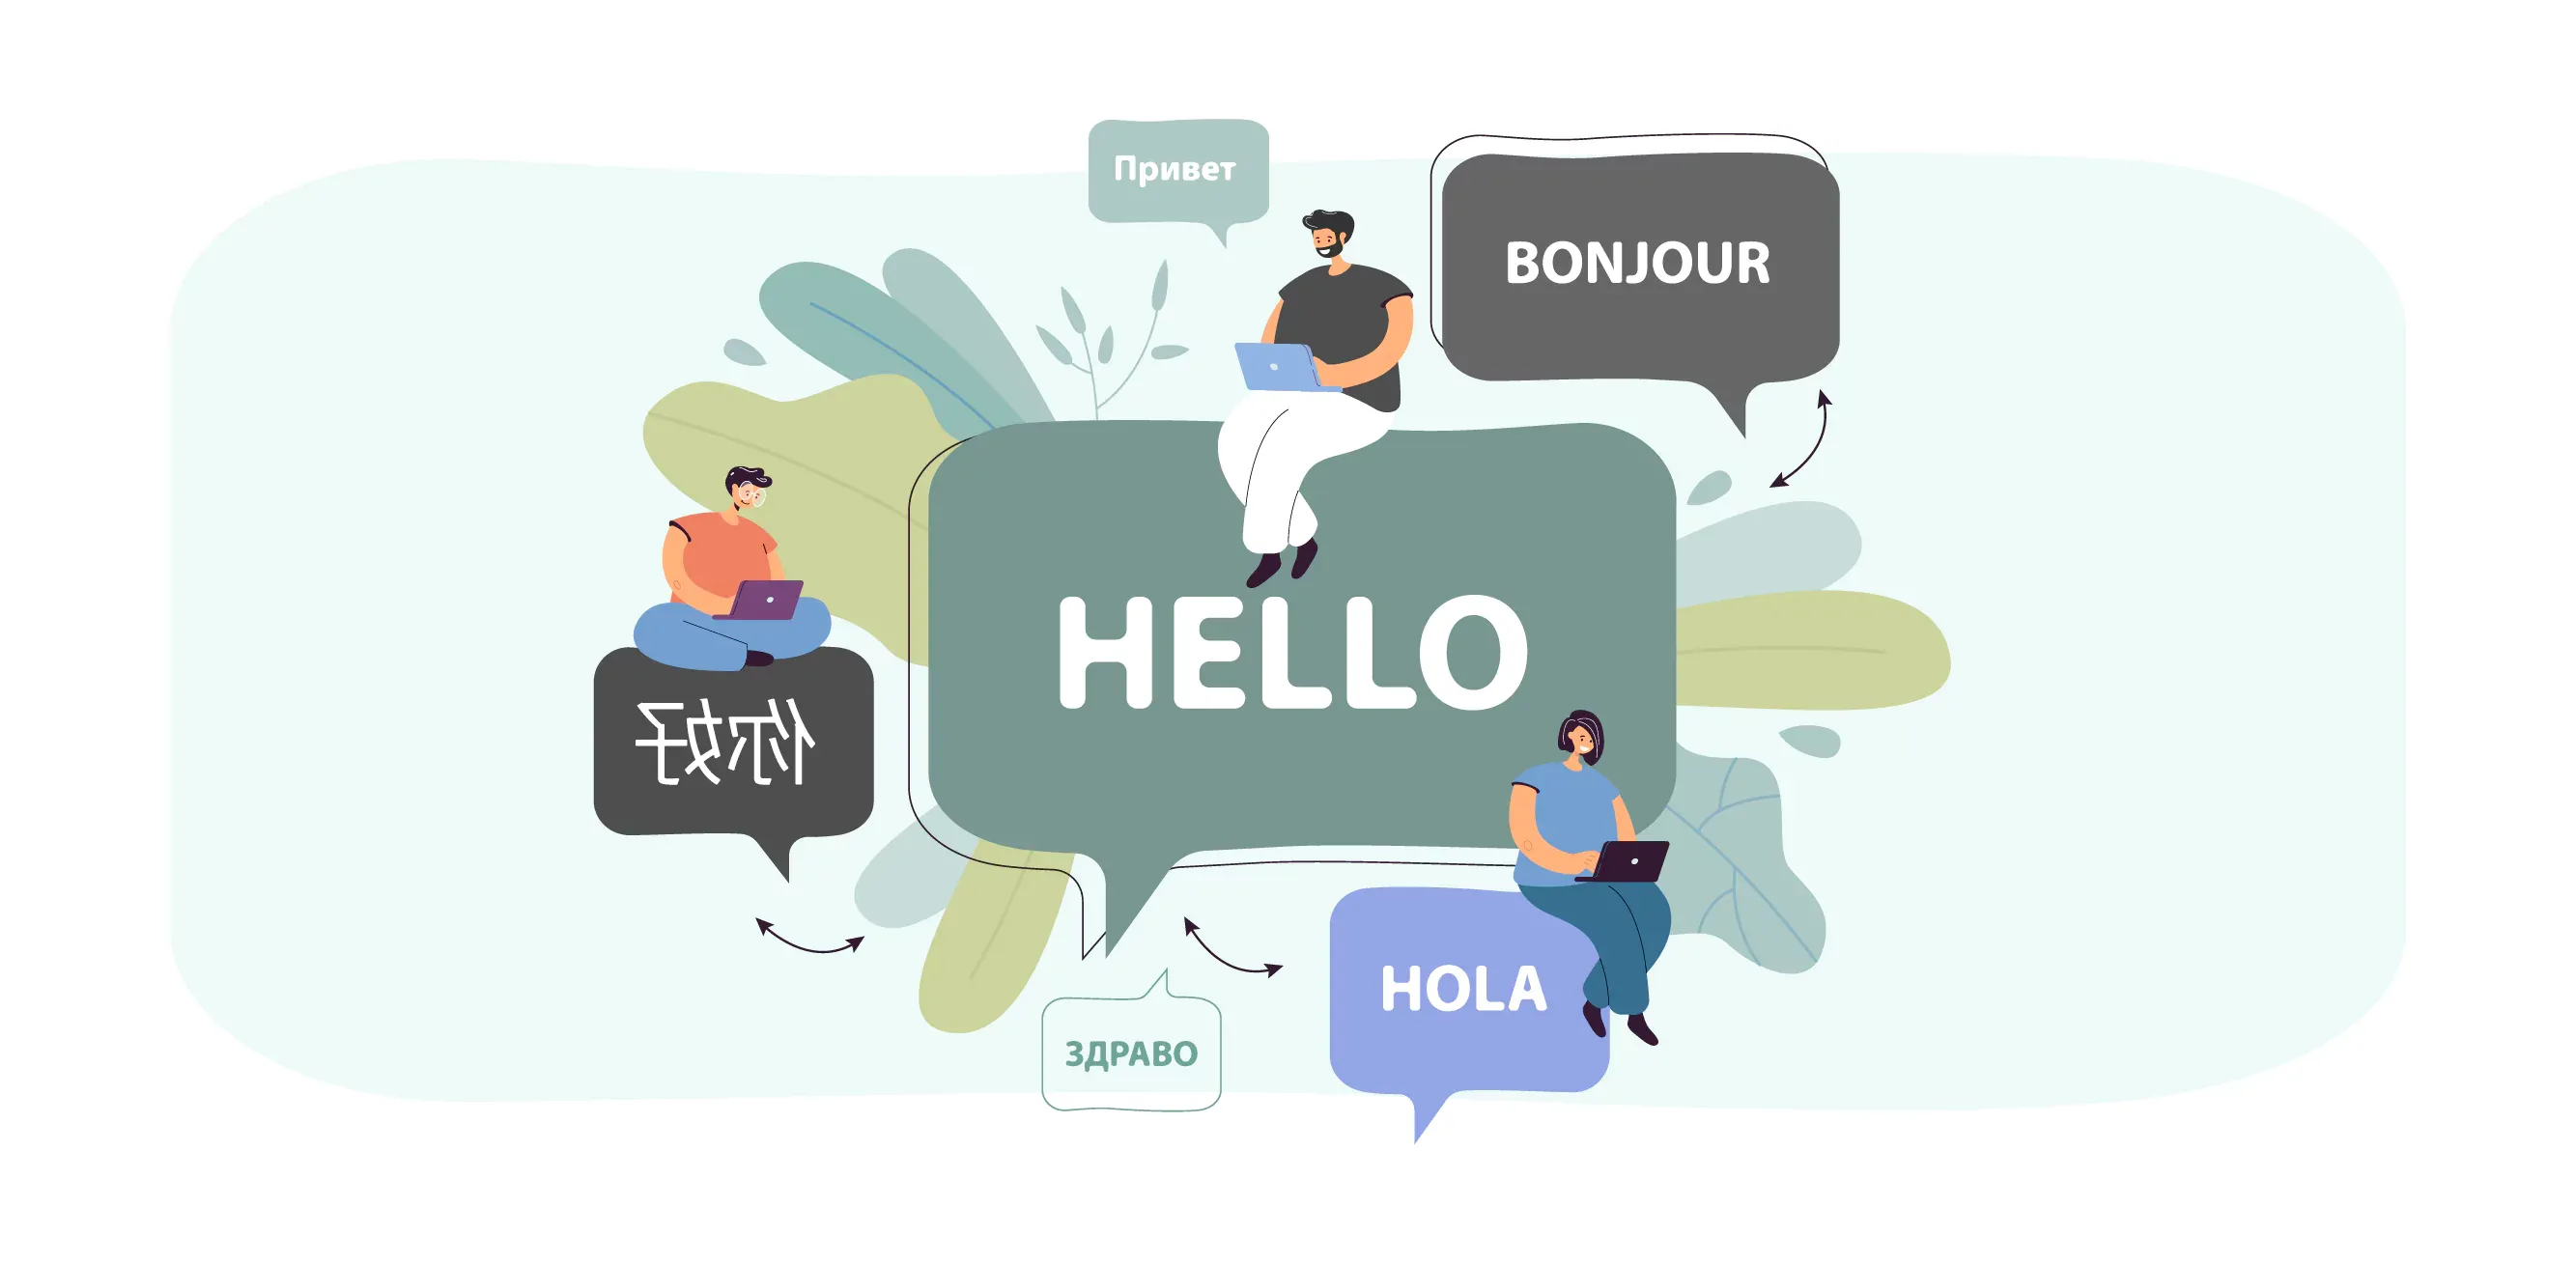 With chatbots, there is no language barrier!